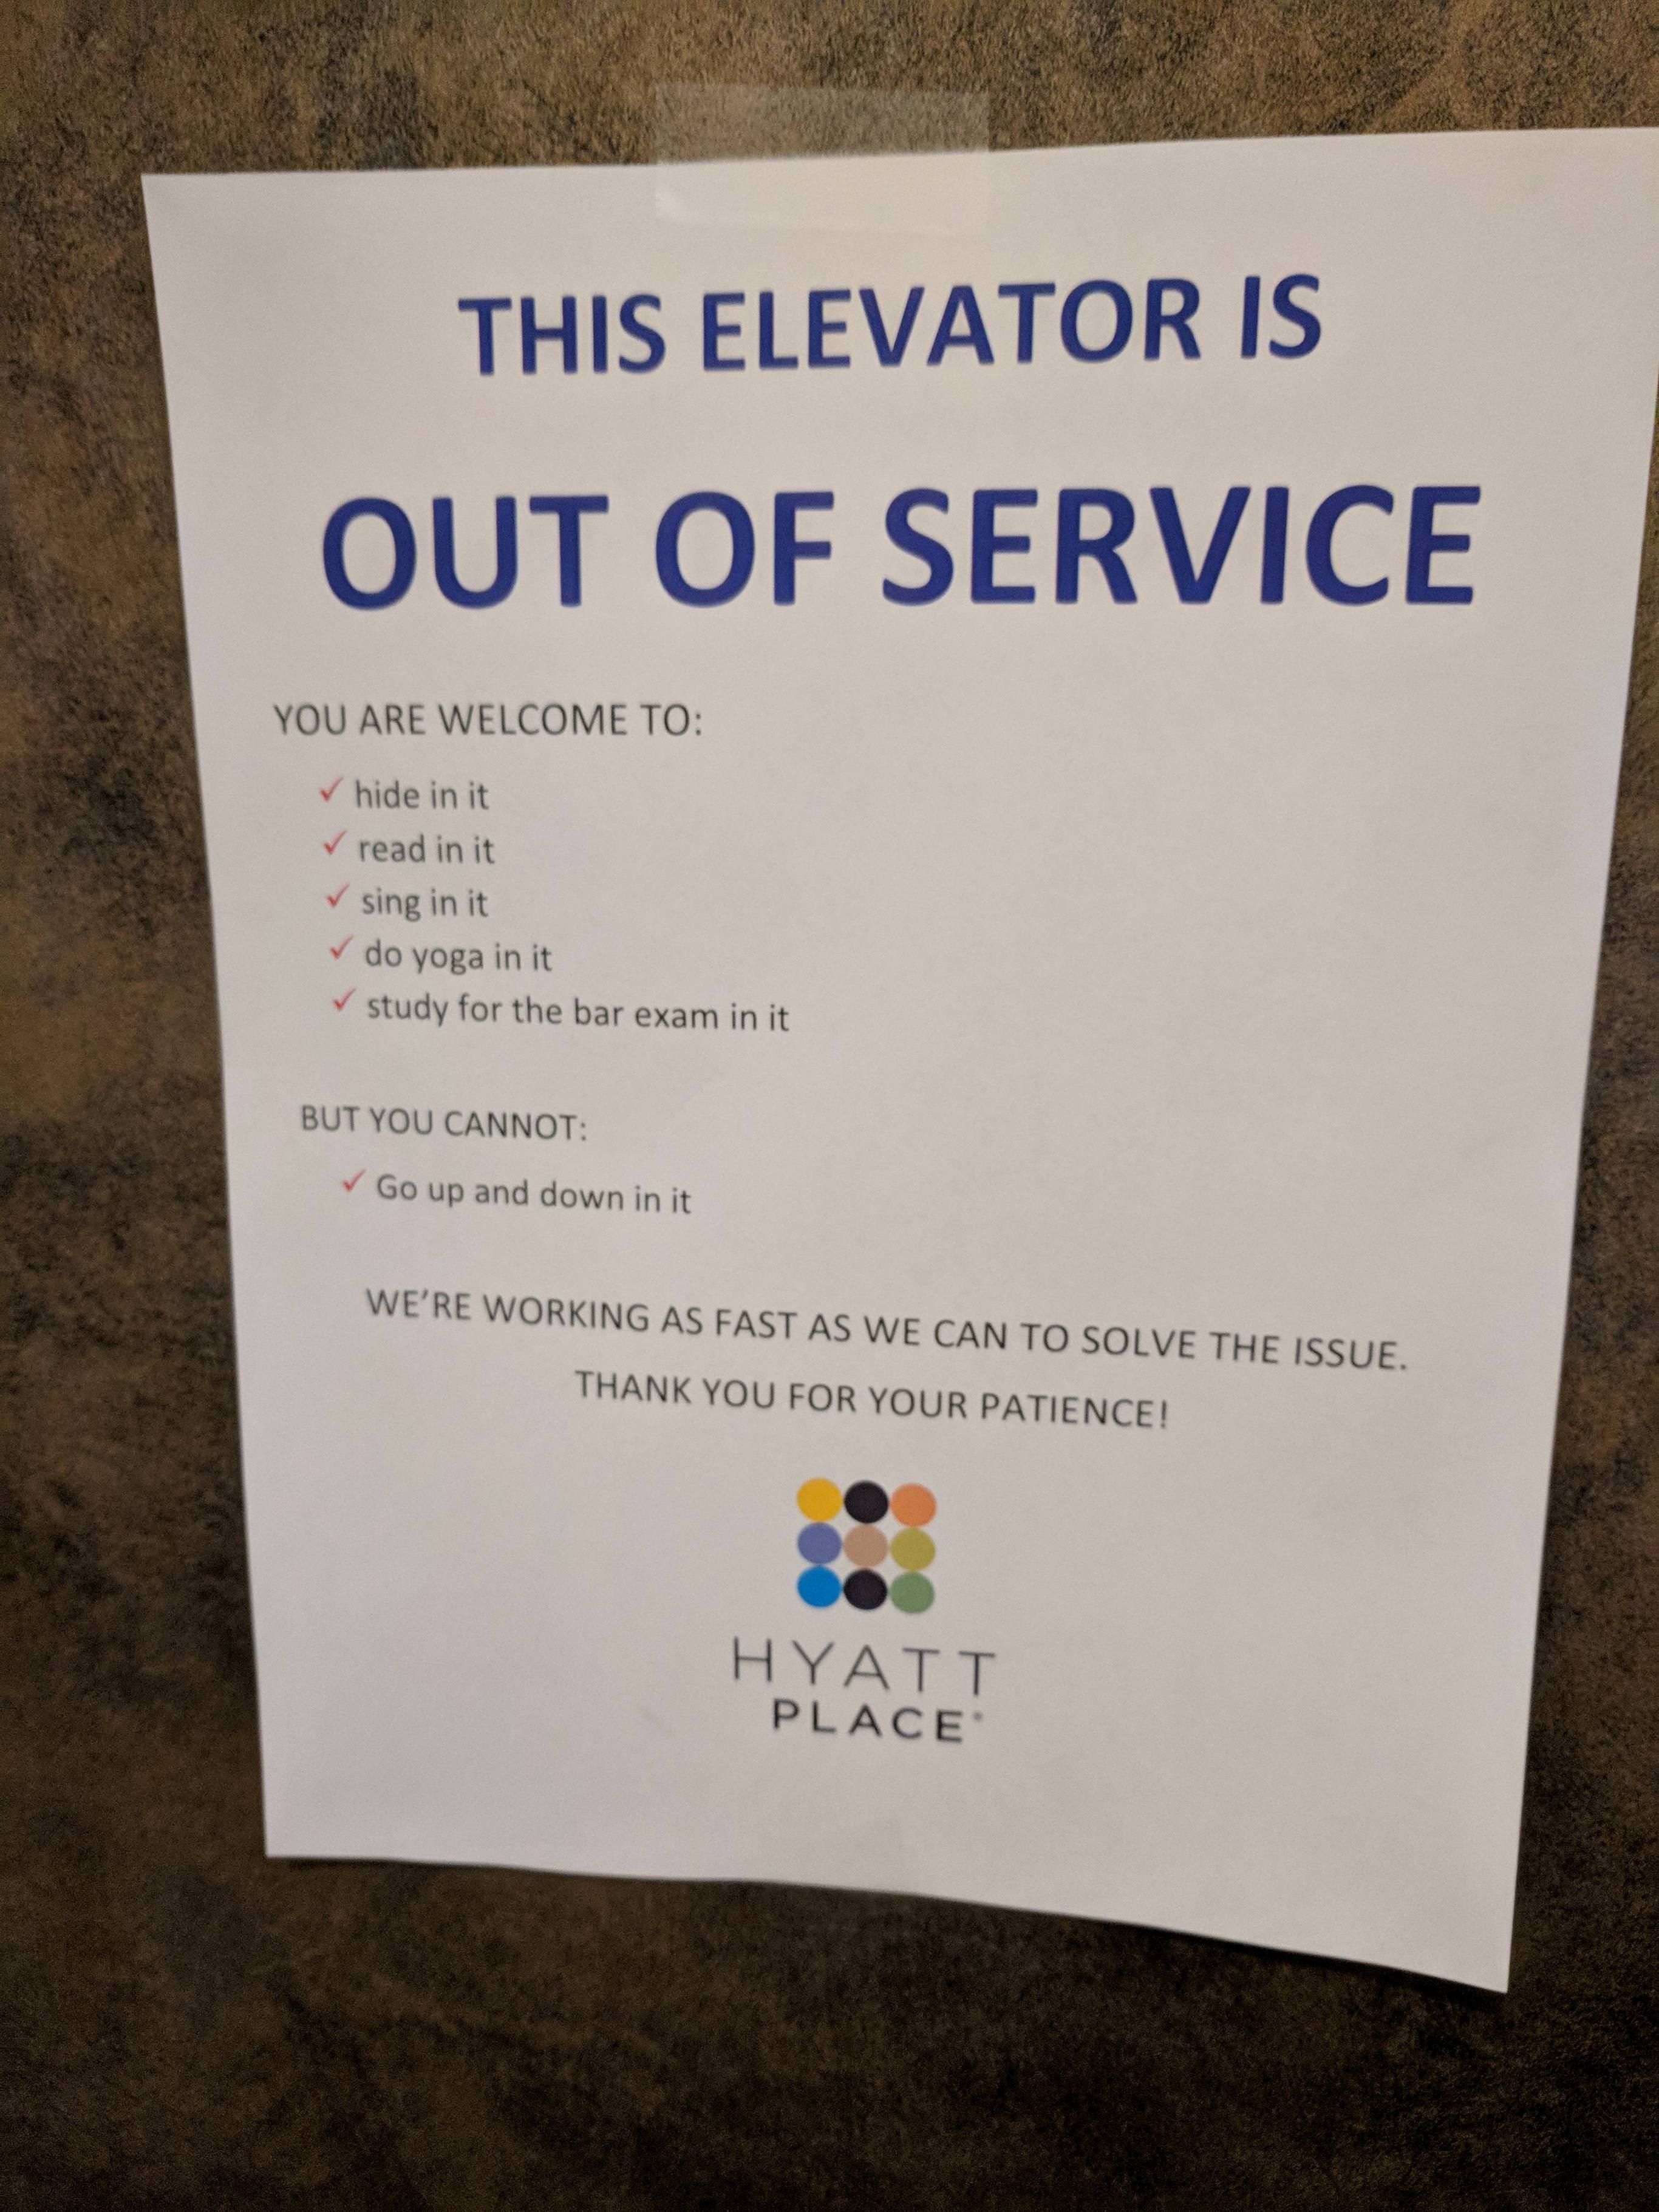 This elevator is out of service.